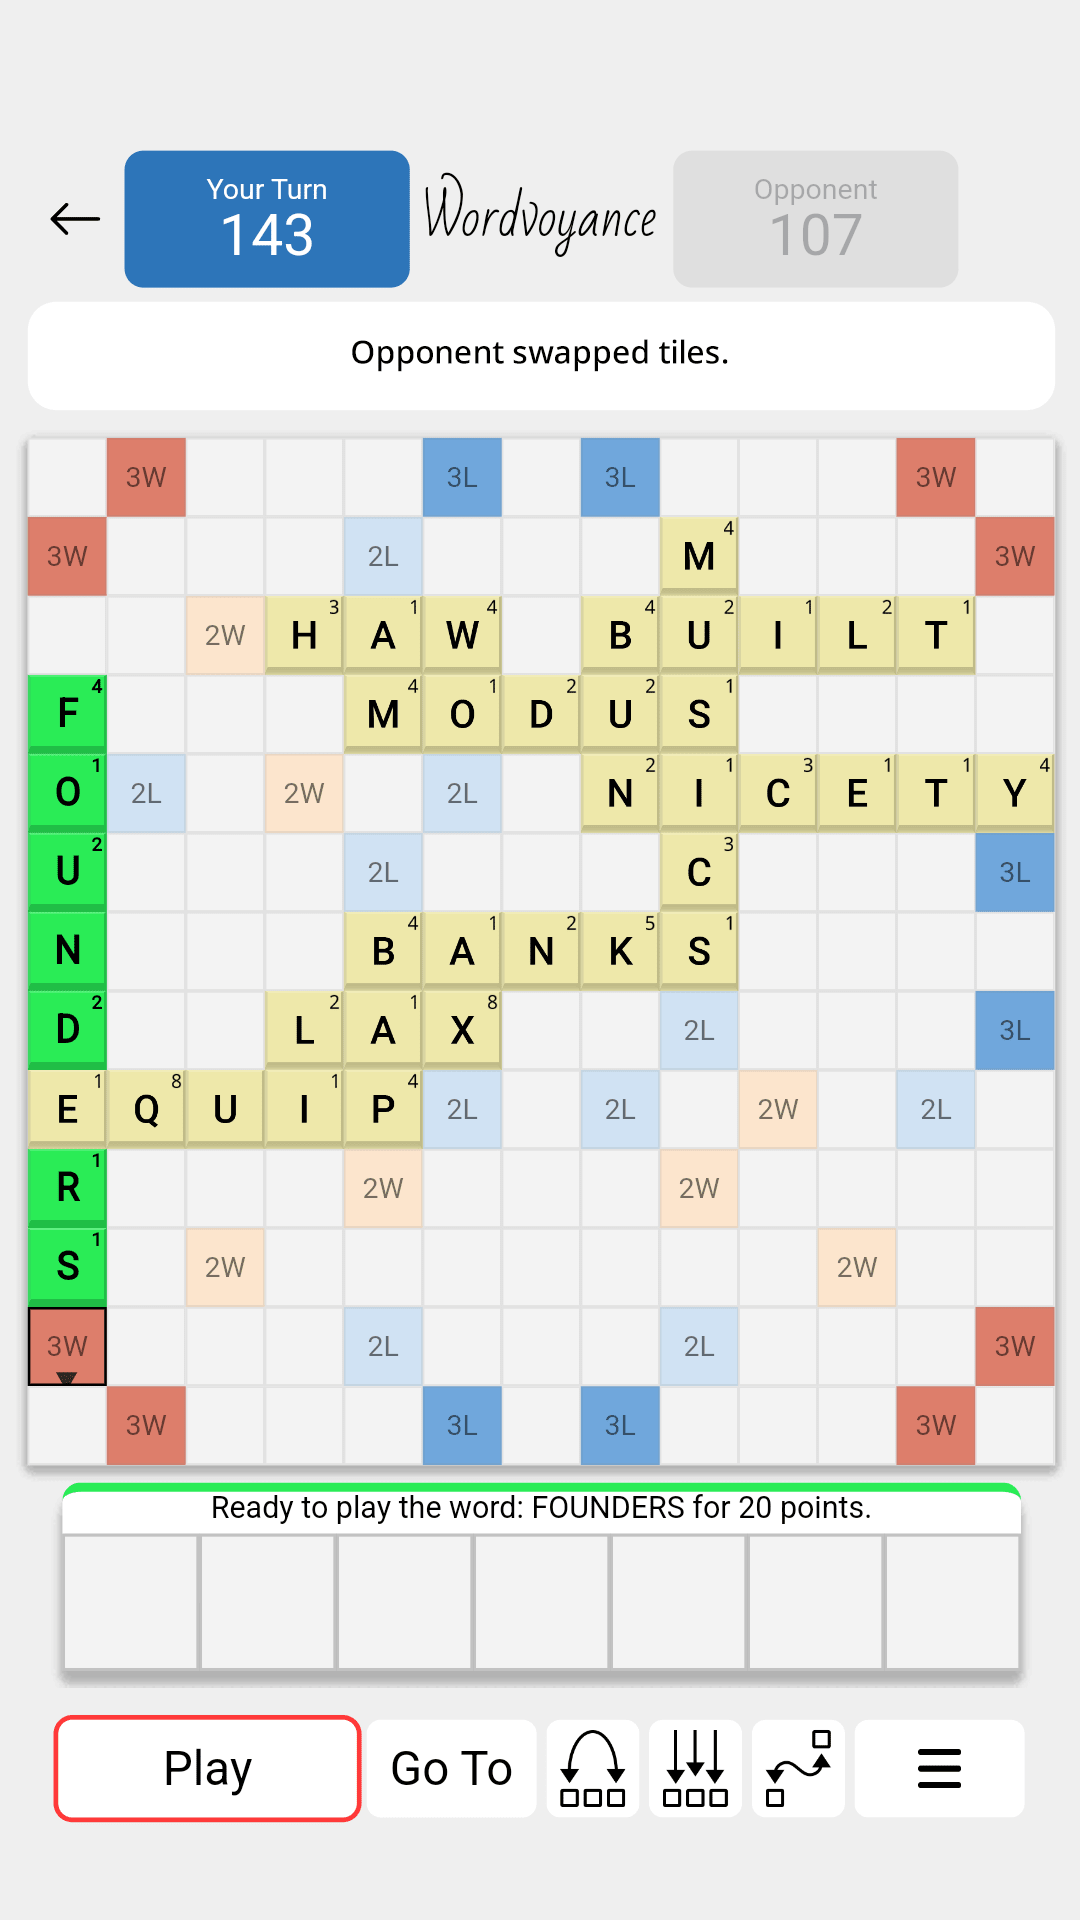 A screenshot of Wordvoyance, in its Light theme, where the player has used rack tiles to spell the word FOUNDERS for 20 points, forming a crossword by intersecting the word EQUIP on the board.